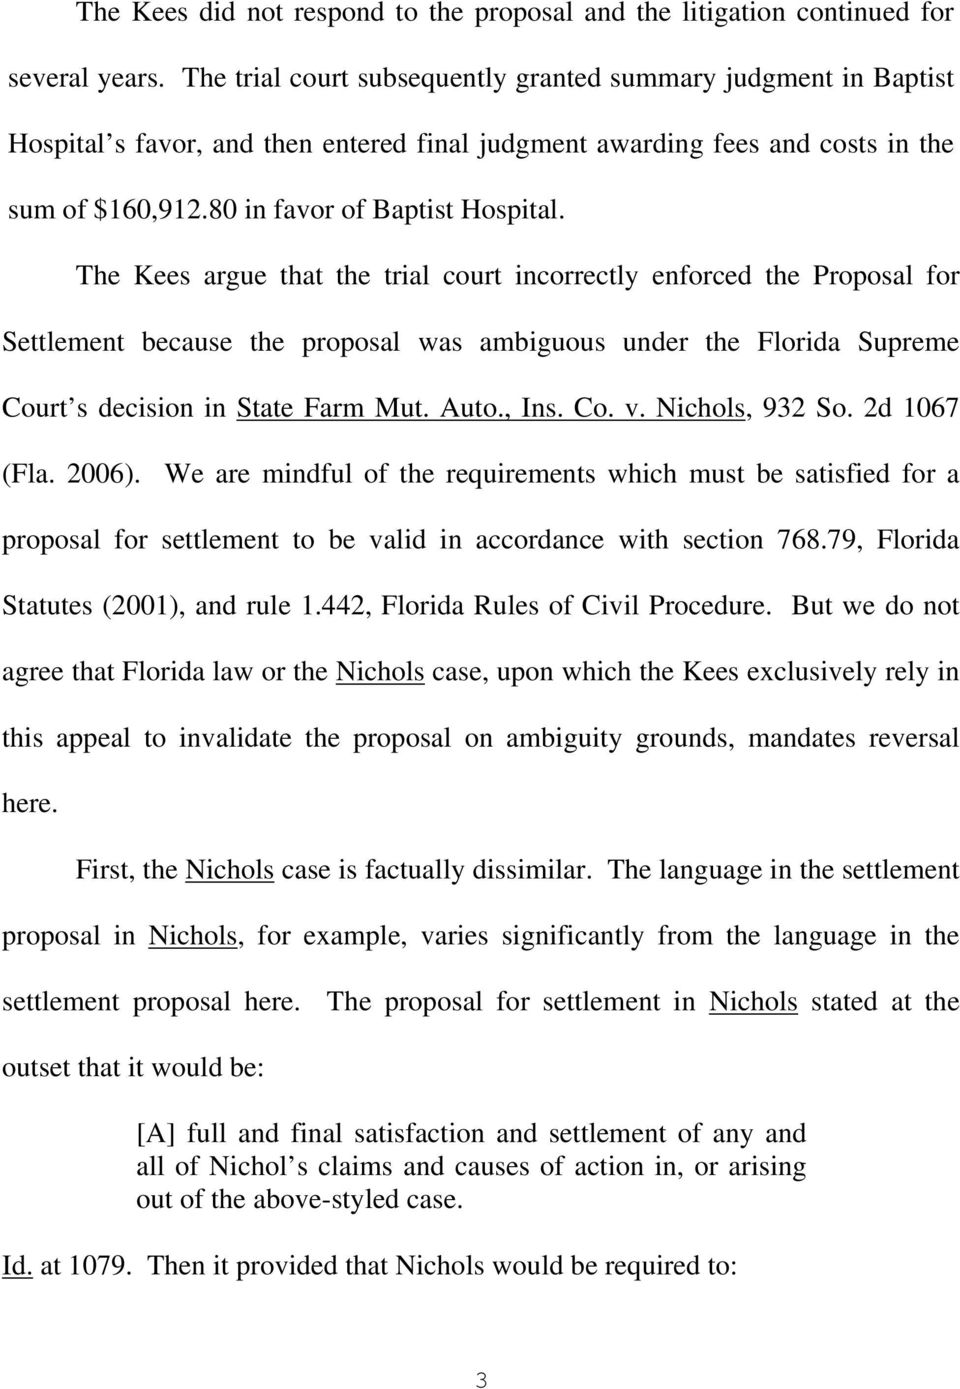 The Kees argue that the trial court incorrectly enforced the Proposal for Settlement because the proposal was ambiguous under the Florida Supreme Court s decision in State Farm Mut. Auto., Ins. Co. v.